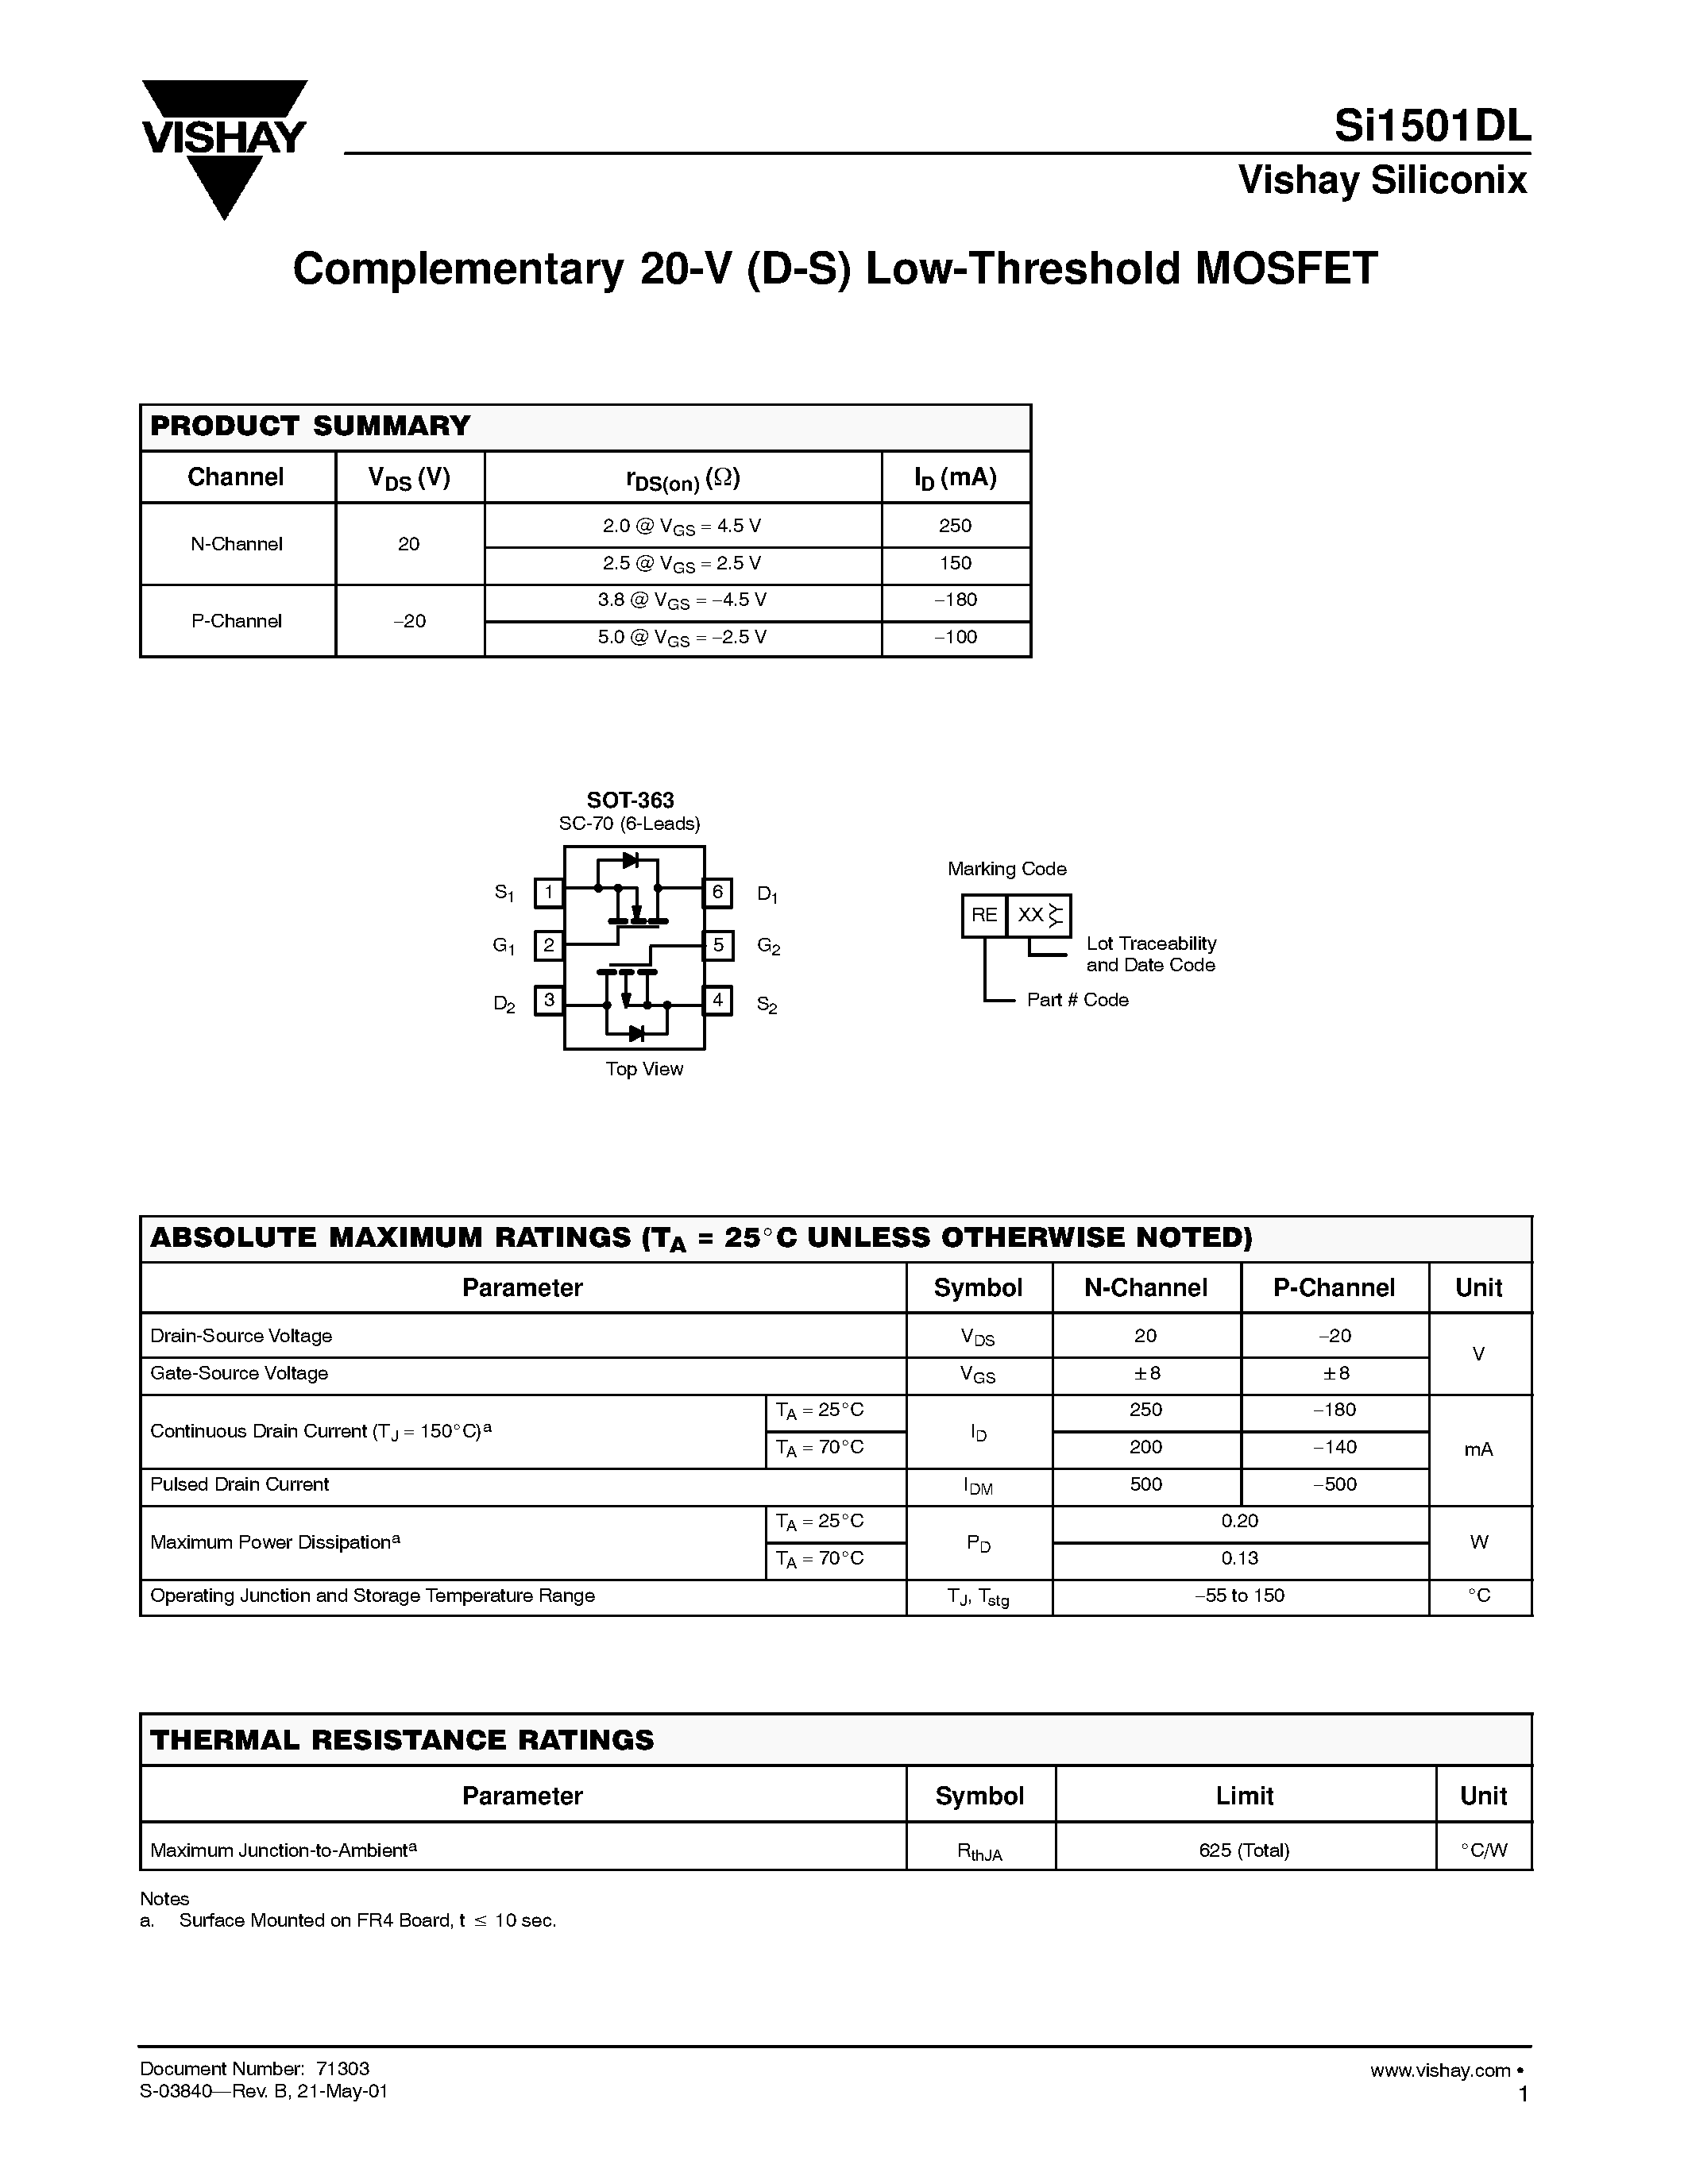 Datasheet SI1501DL - Complementary 20-V (D-S) Low-Threshold MOSFET page 1